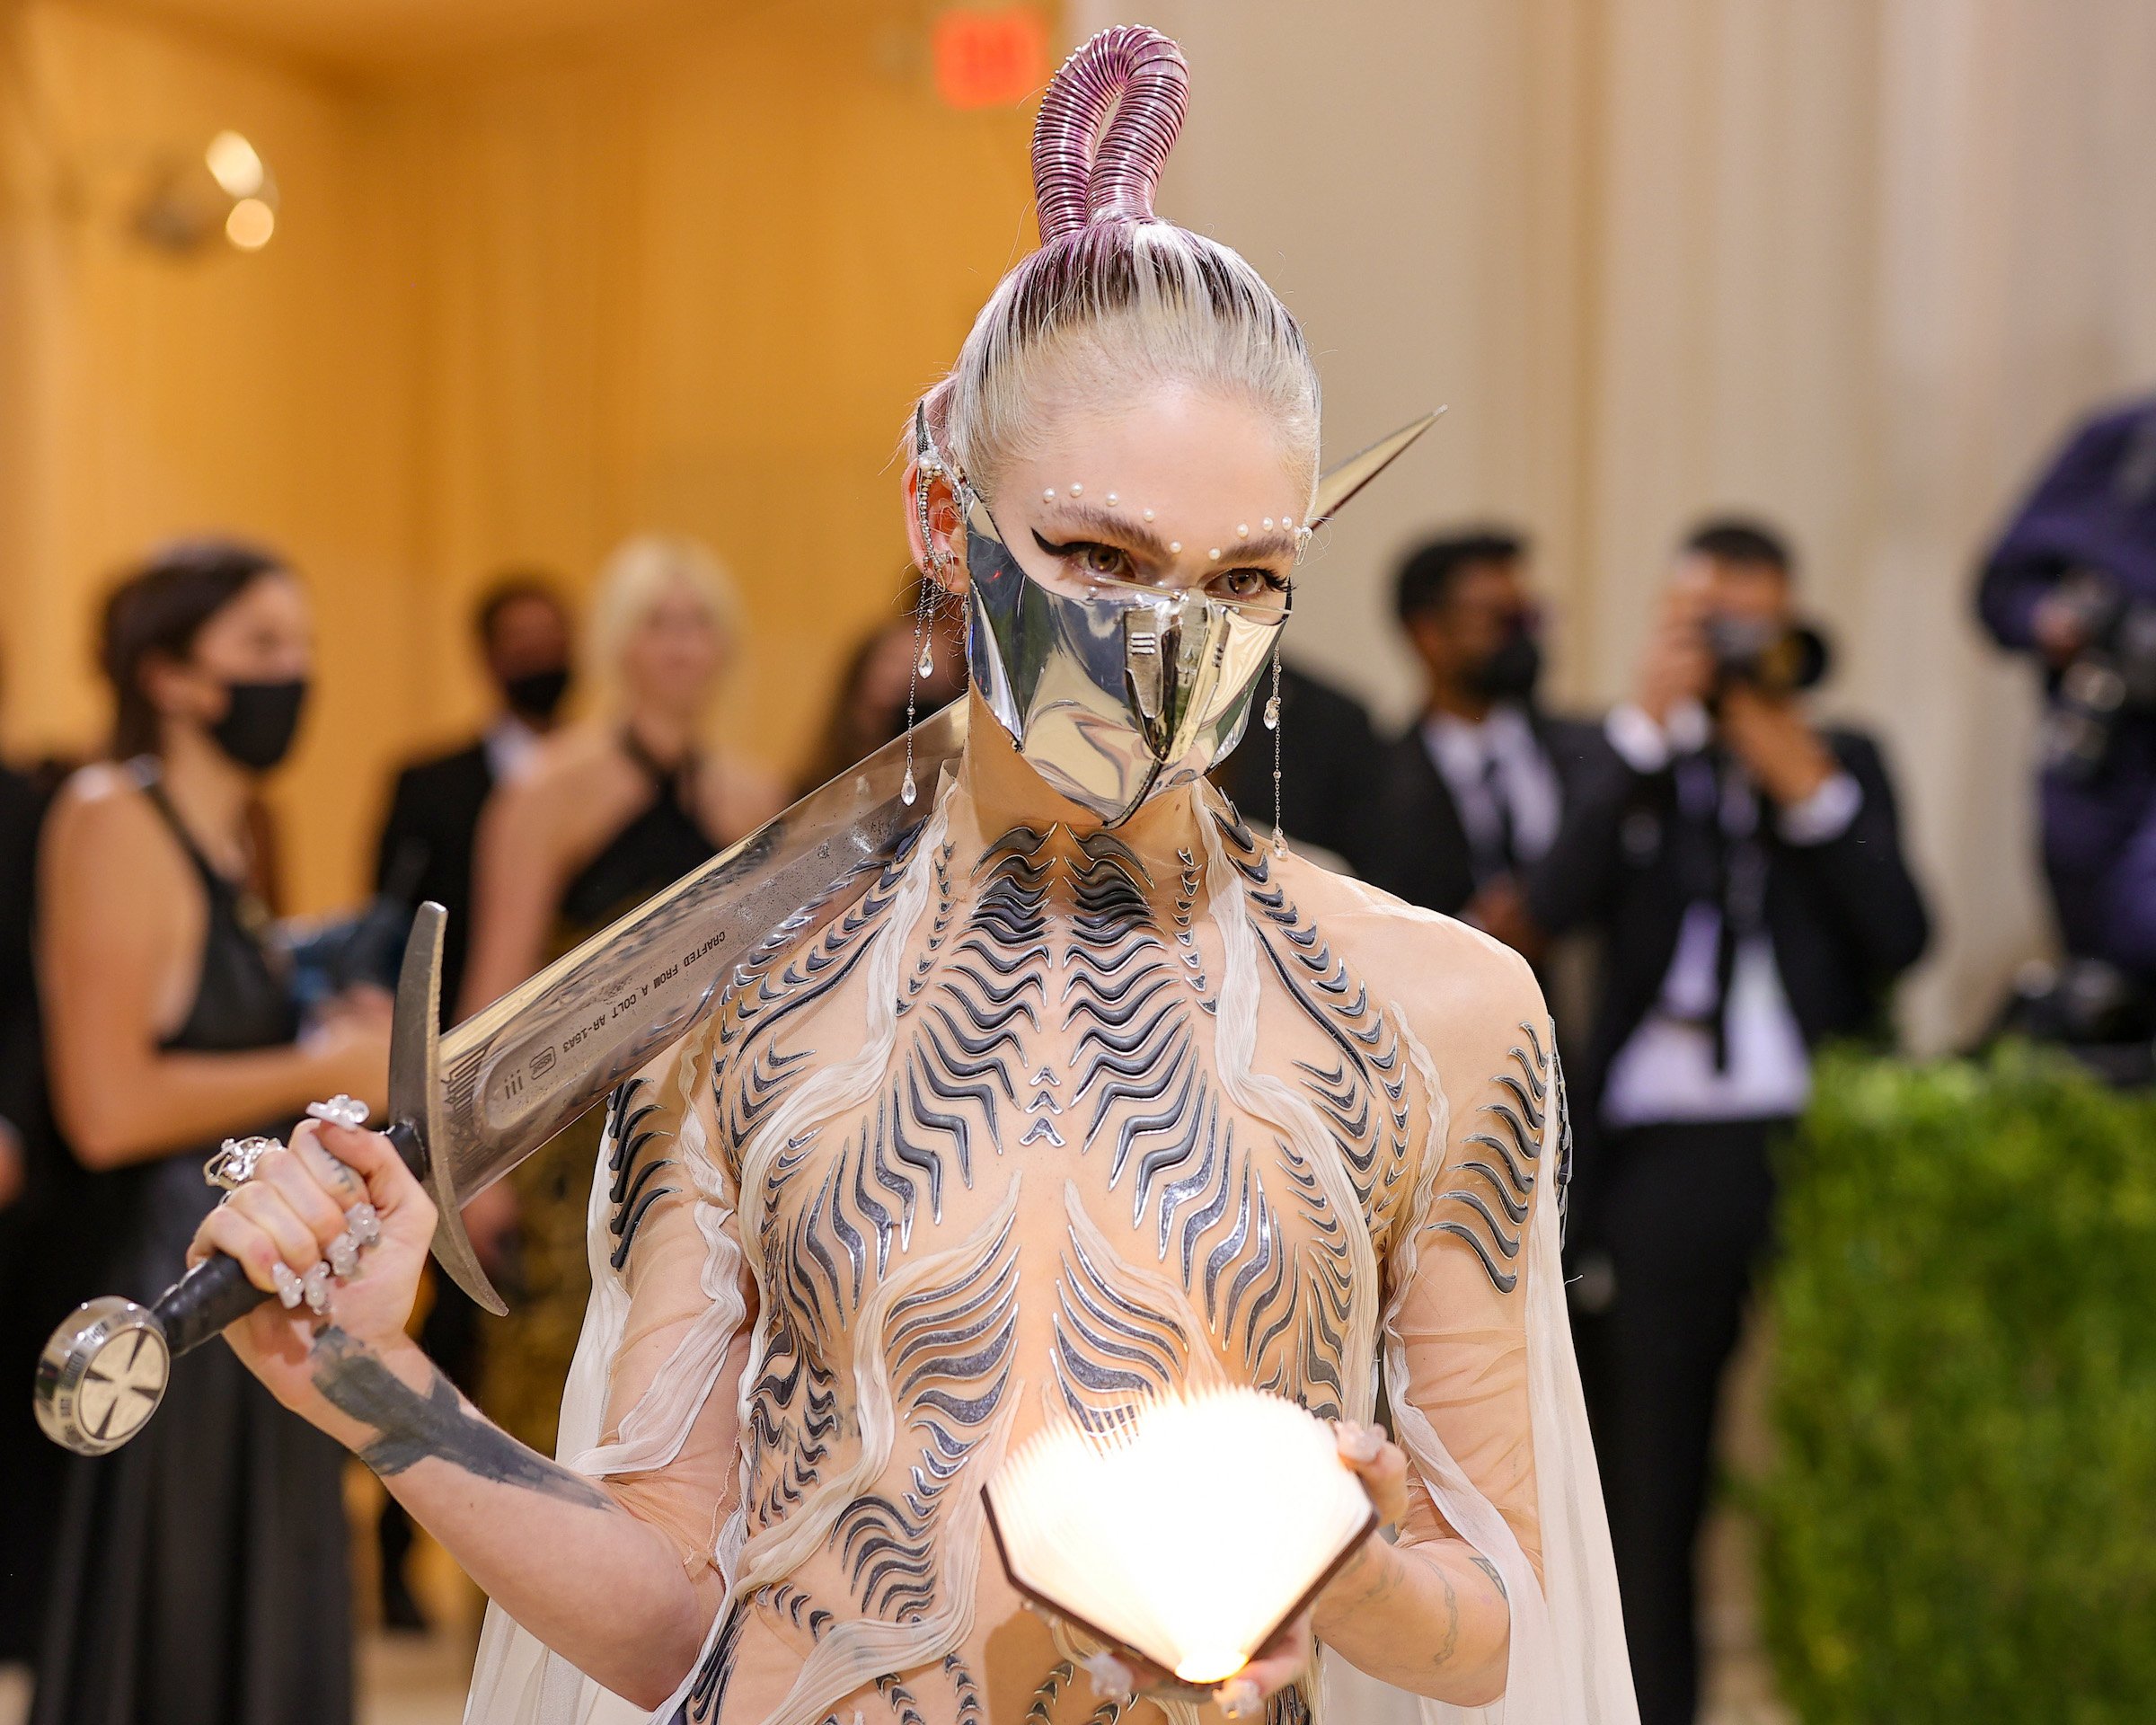 Grimes, who is having surgery on her ears, wearing a silver look at the Met Gala